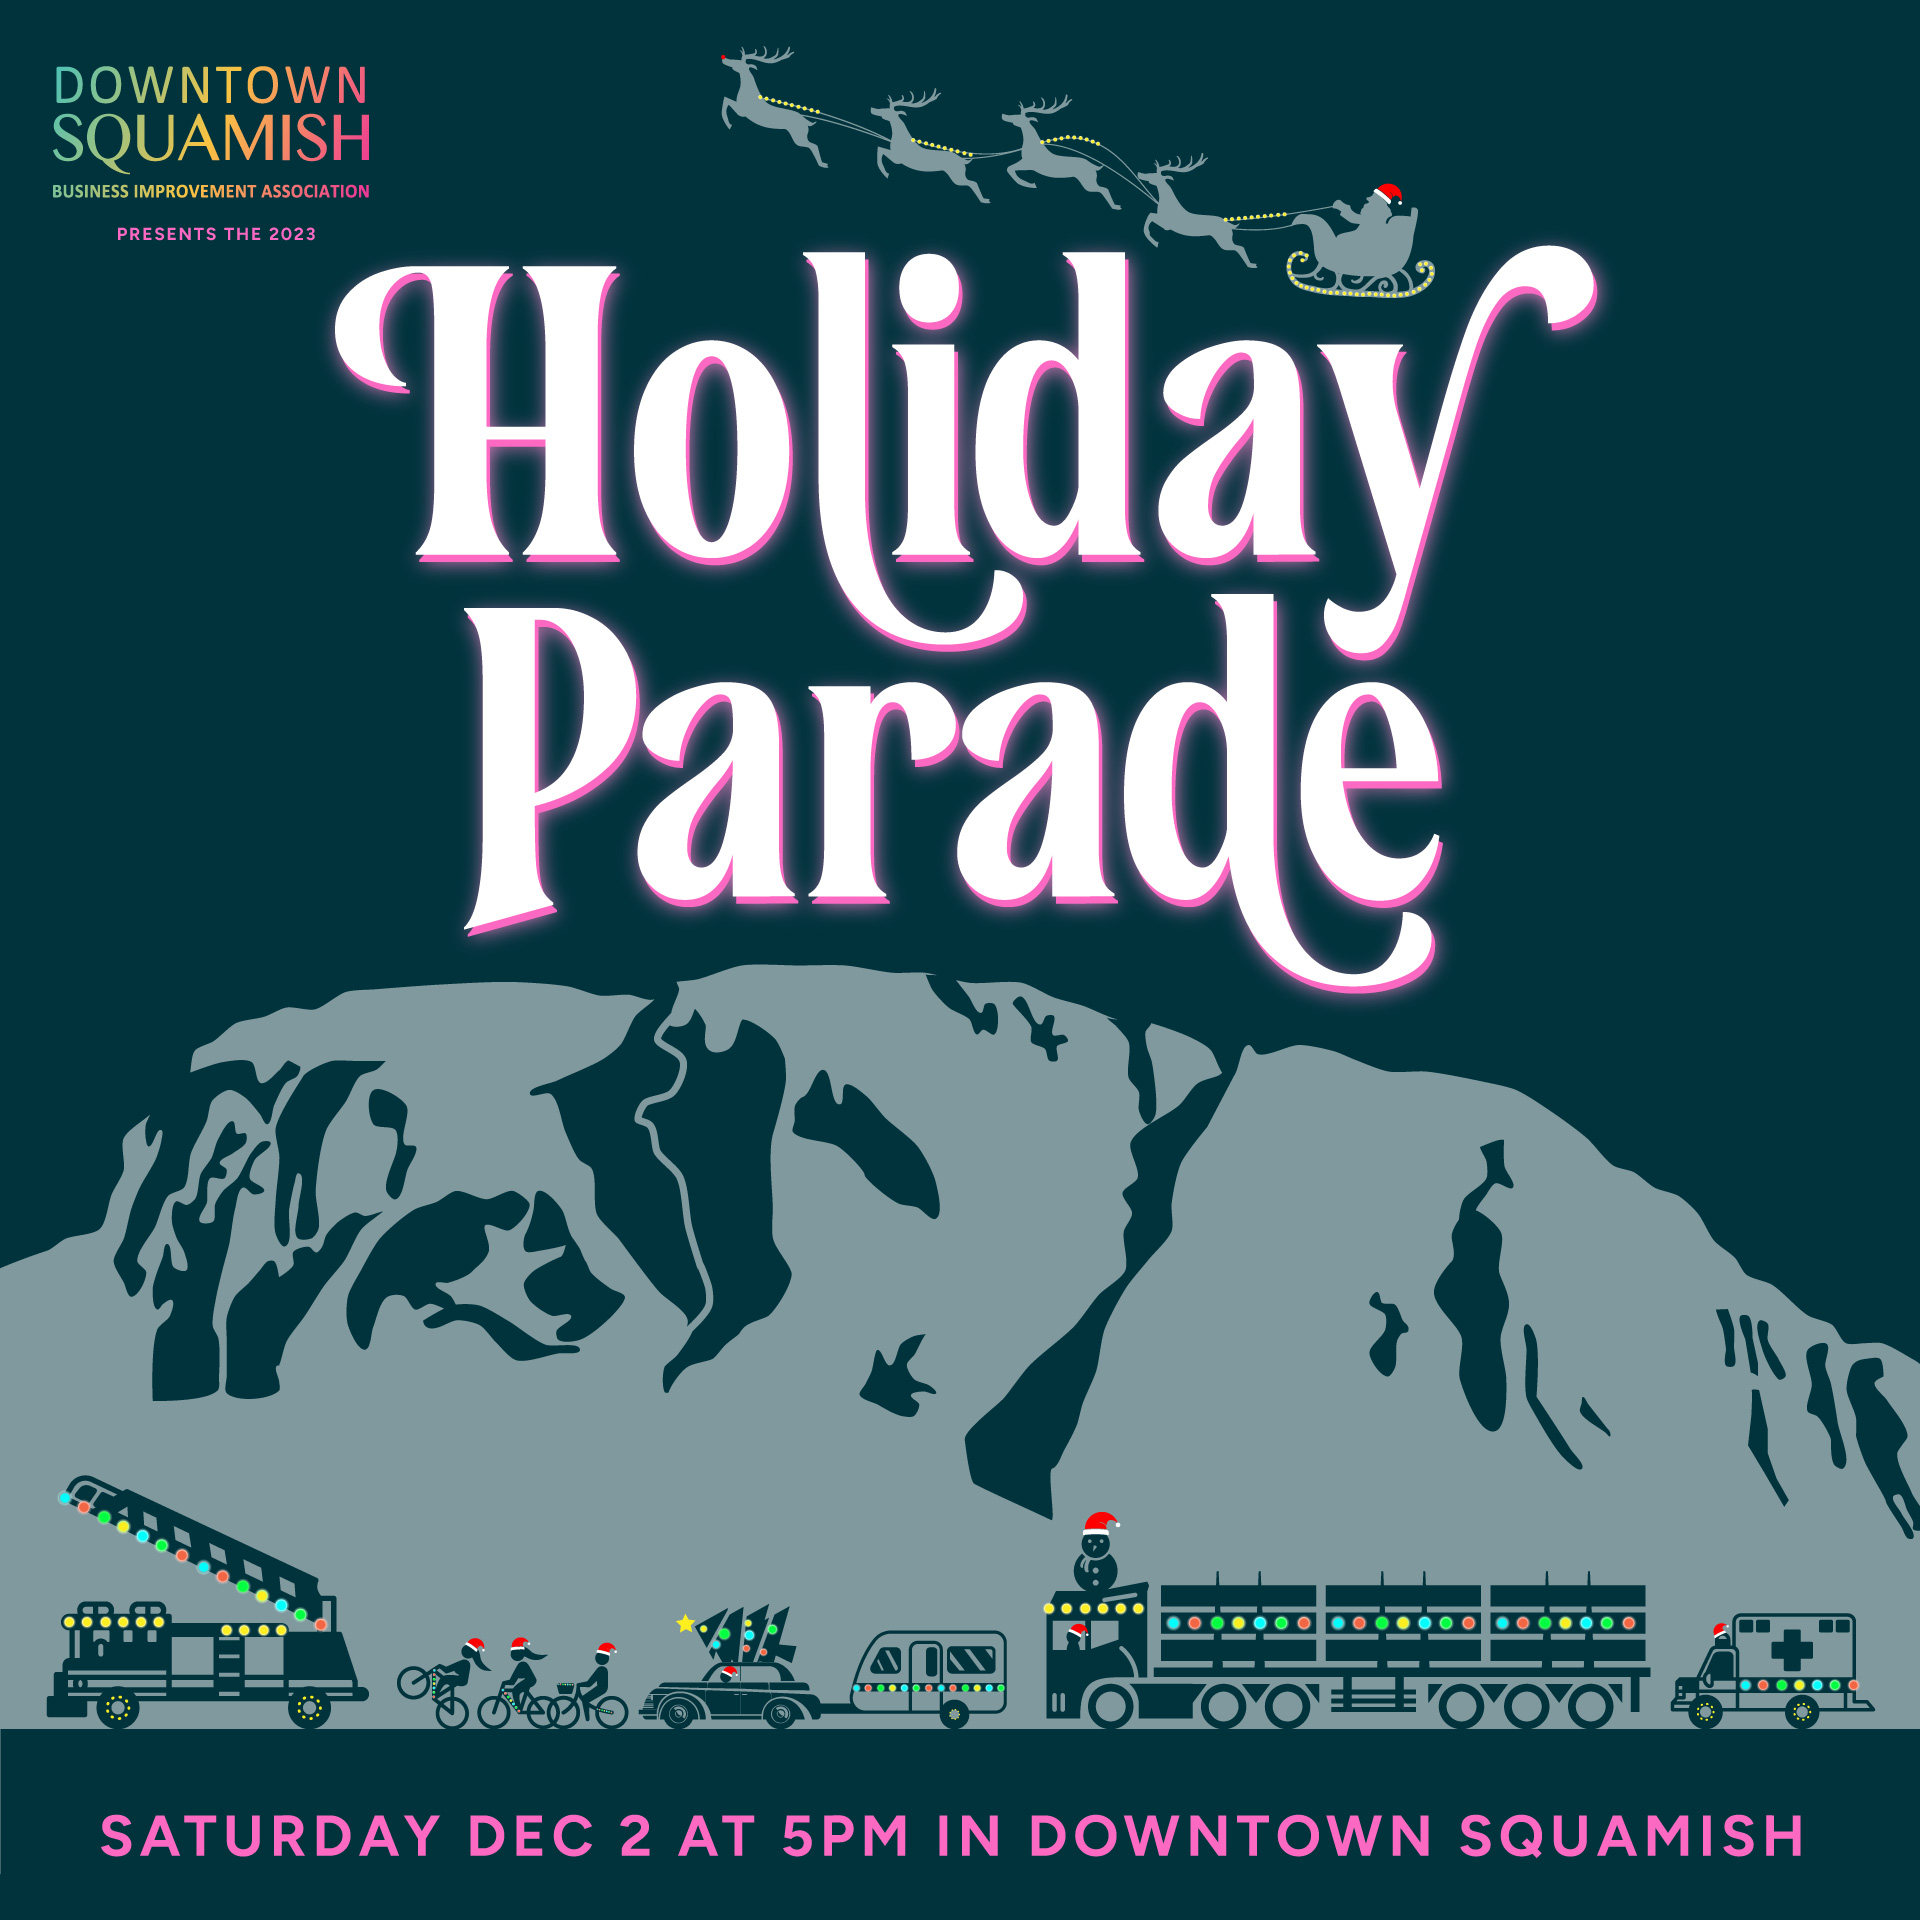 https://www.downtownsquamish.com/wp-content/uploads/2023/09/square-holiday-parade.jpg